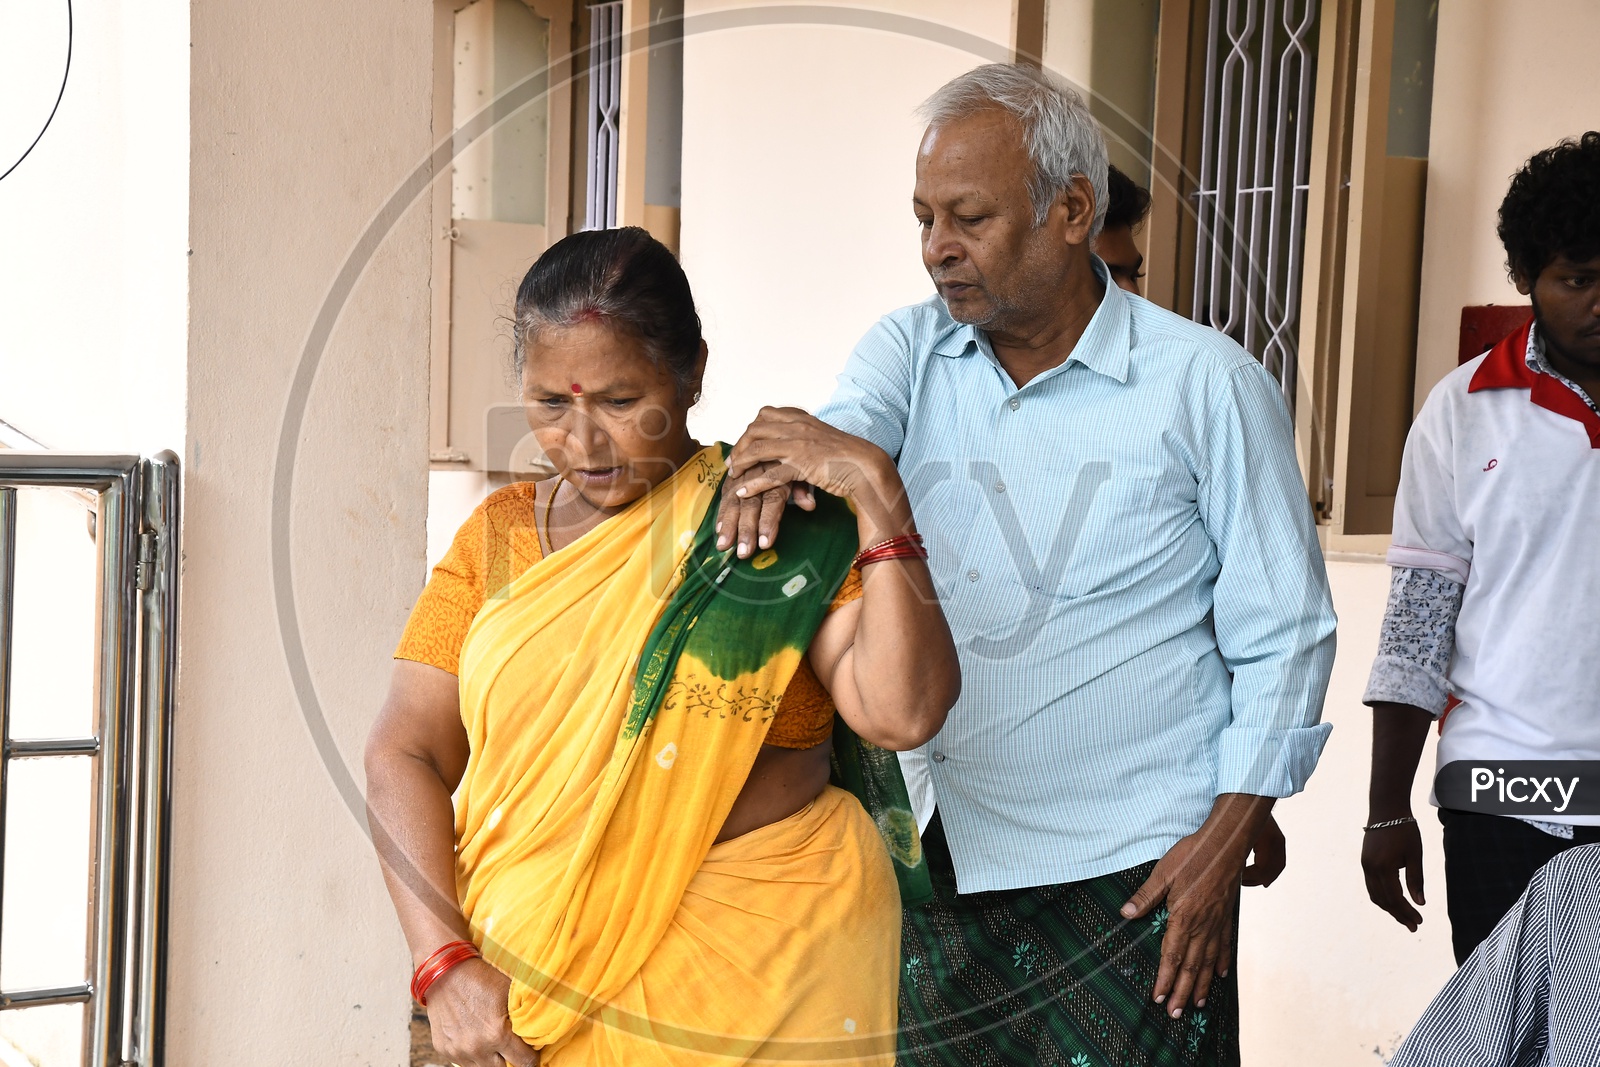 Indian Wife Taking Care of Husband In an Old-Age Home